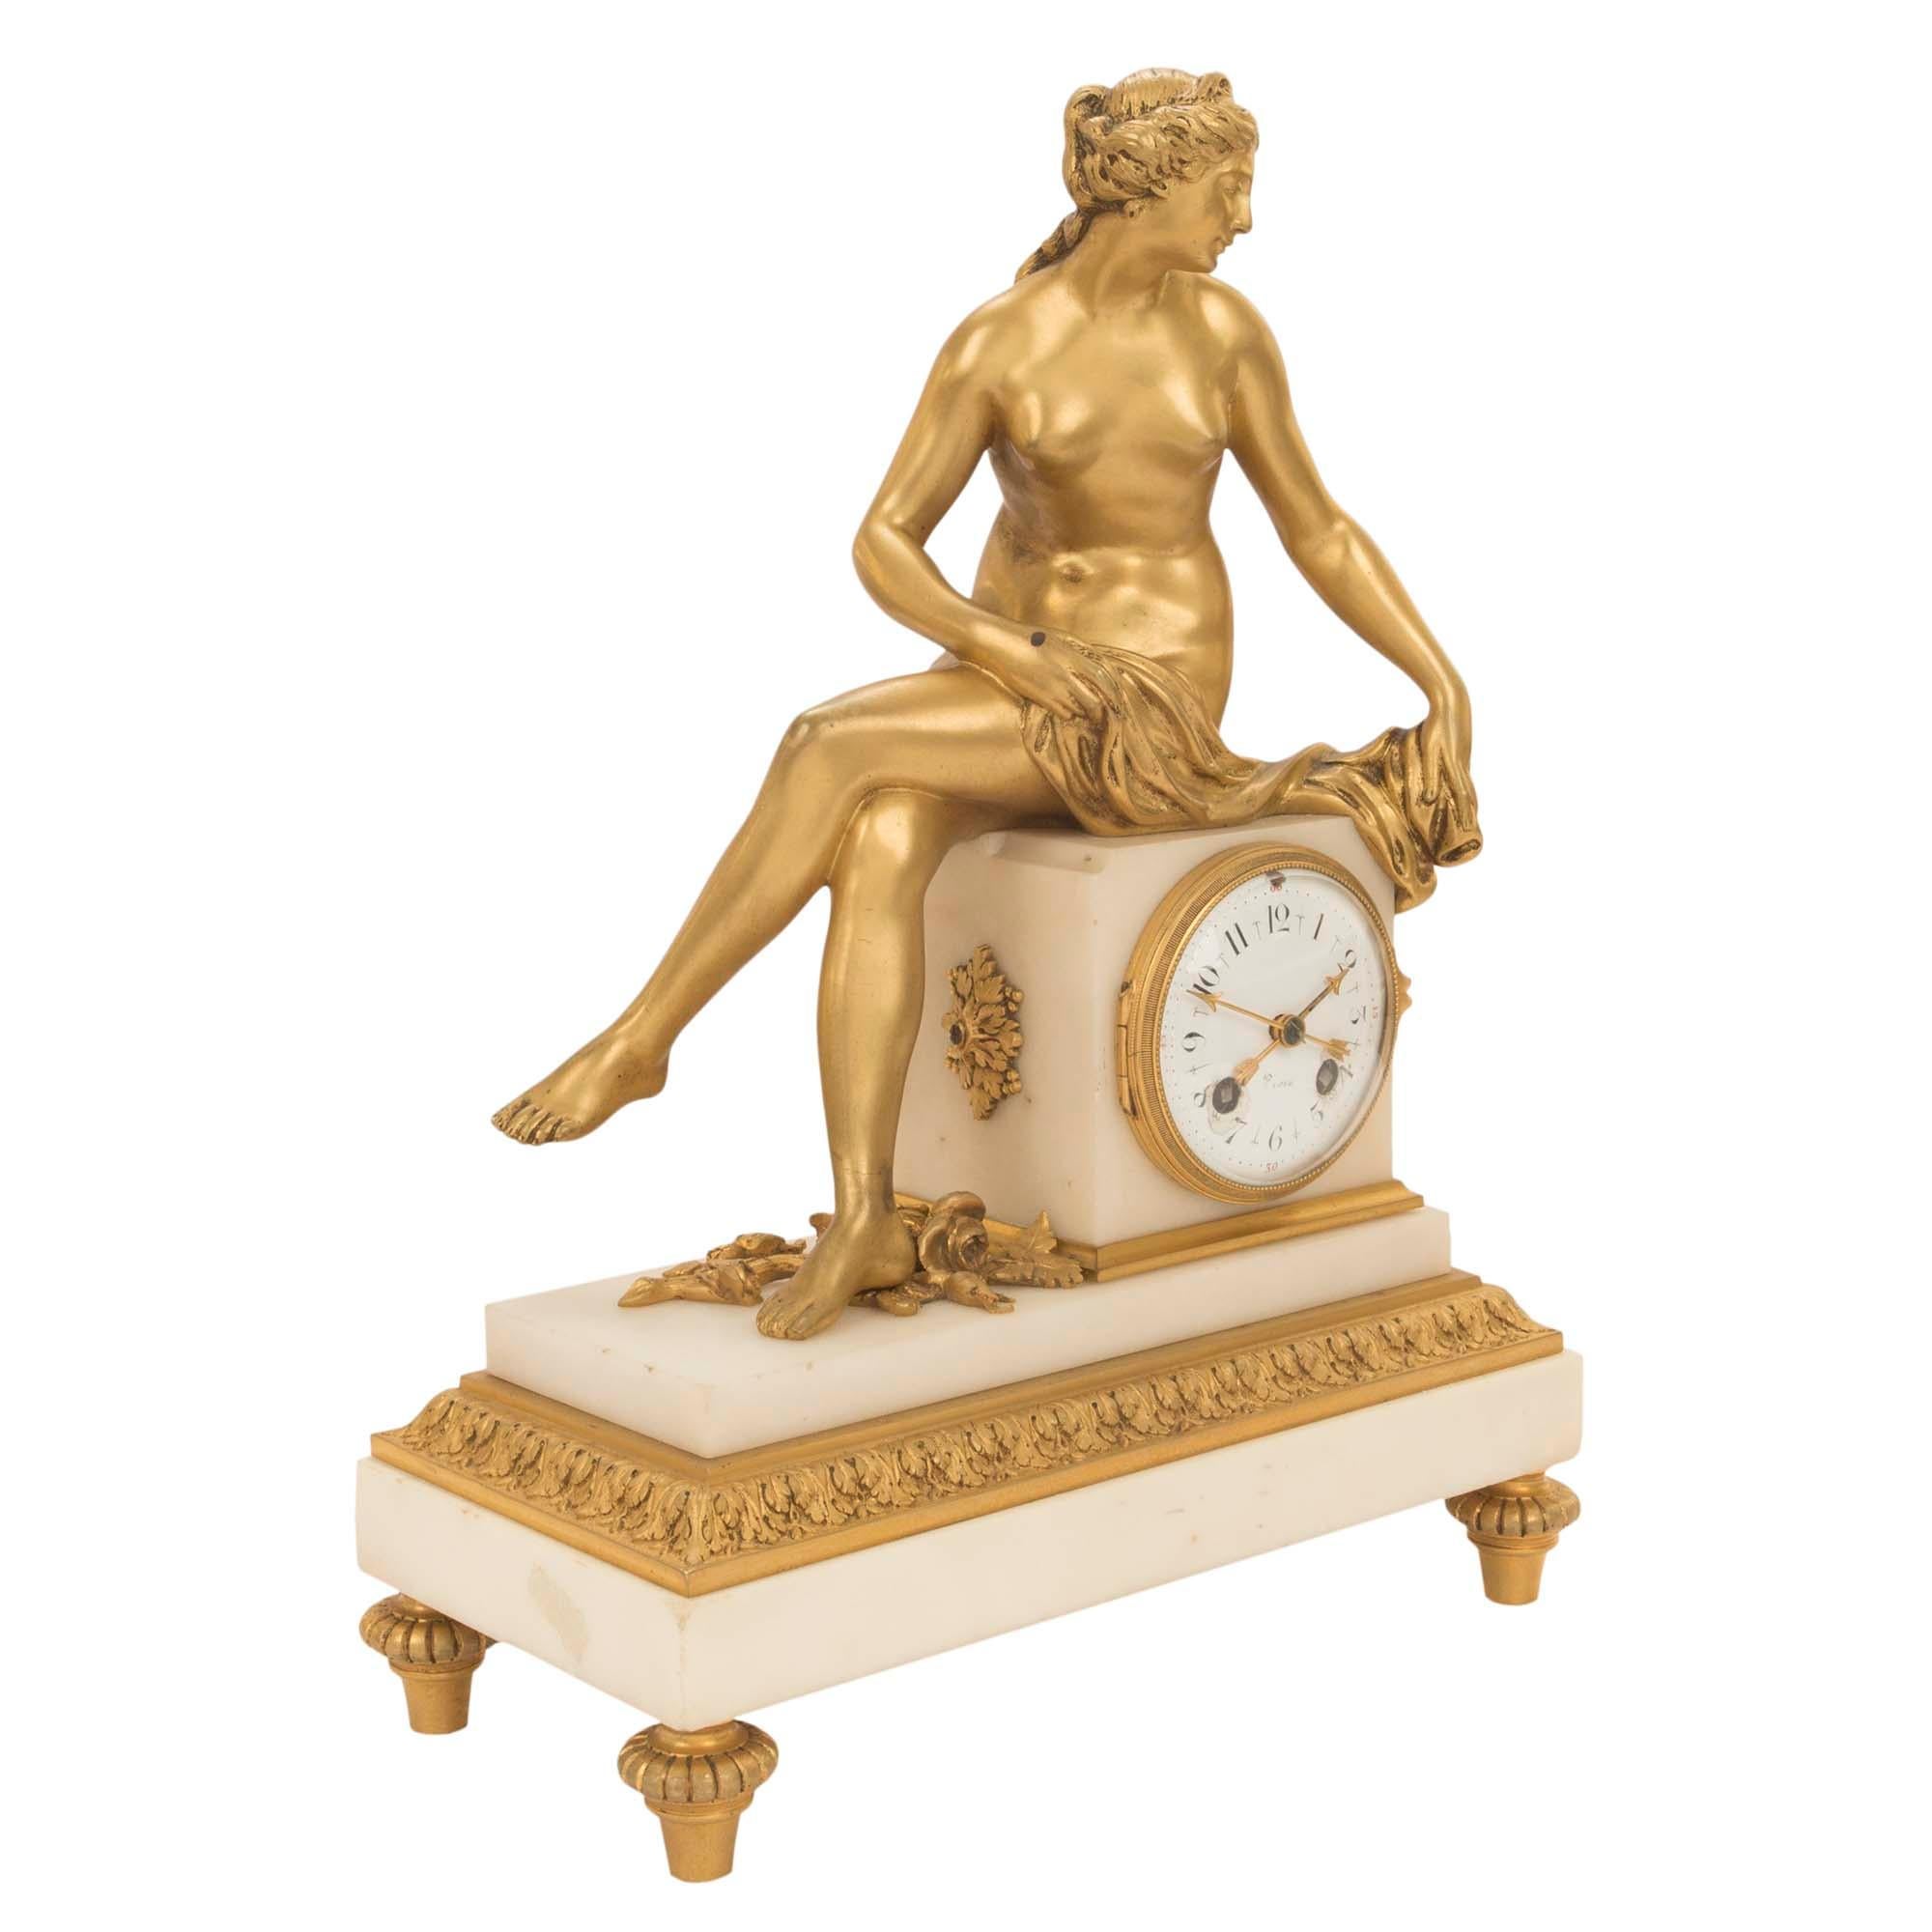 A most exquisite French mid 19th century Louis XVI st. ormolu and white Carrara marble clock. The clock is raised by topie shaped ormolu supports, The rectangular marble base is decorated by a very rich and detailed acorn leaf ormolu border. Above